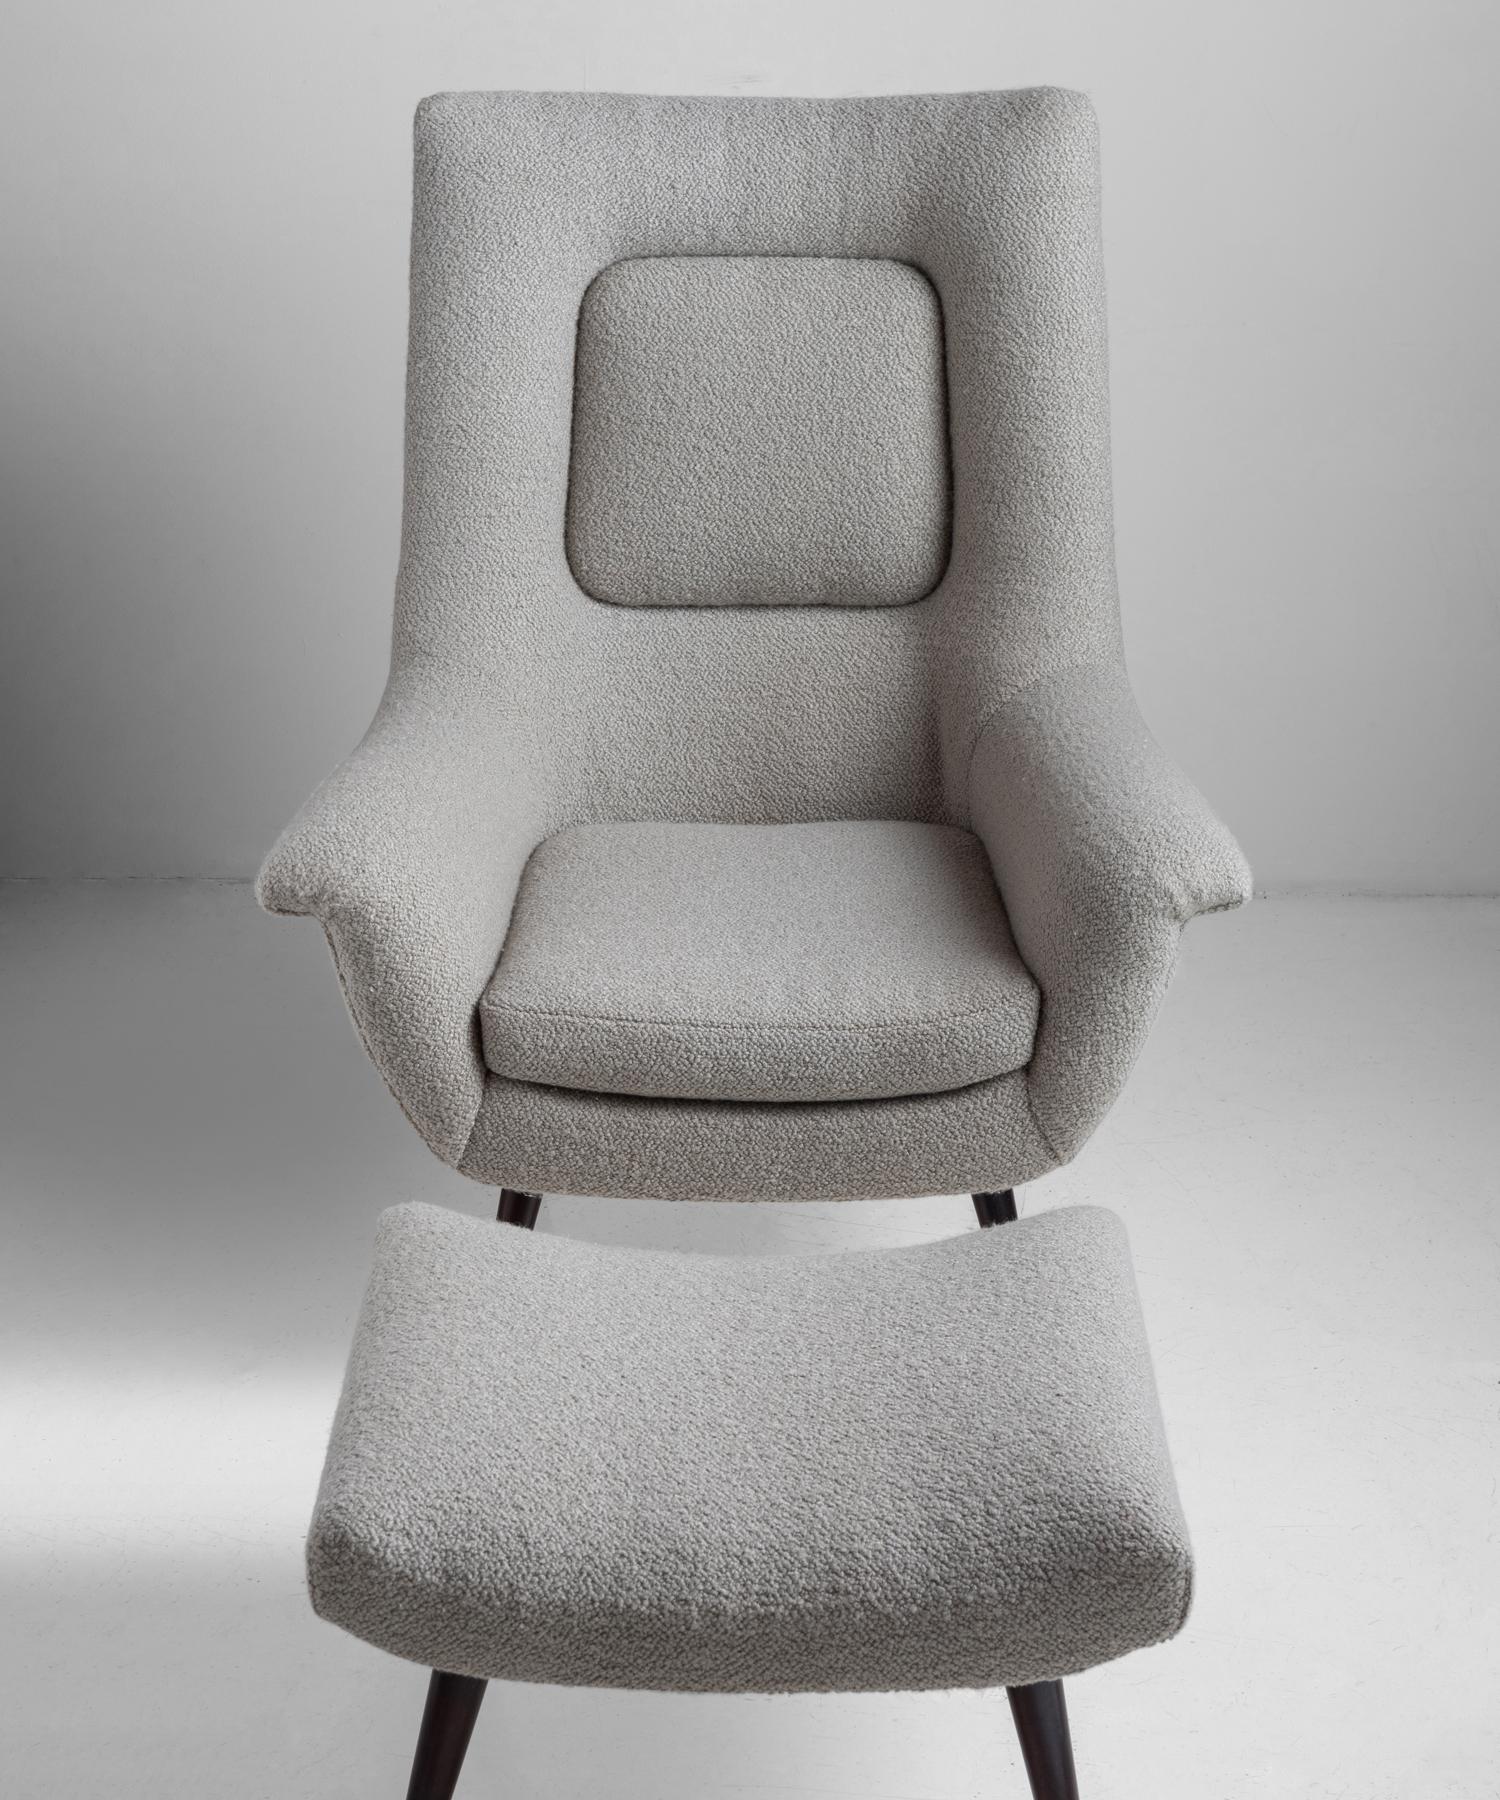 High back lounge chair with matching ottoman, newly upholstered in a textured wool blend from Maharam.
 
Chair Measures: 32